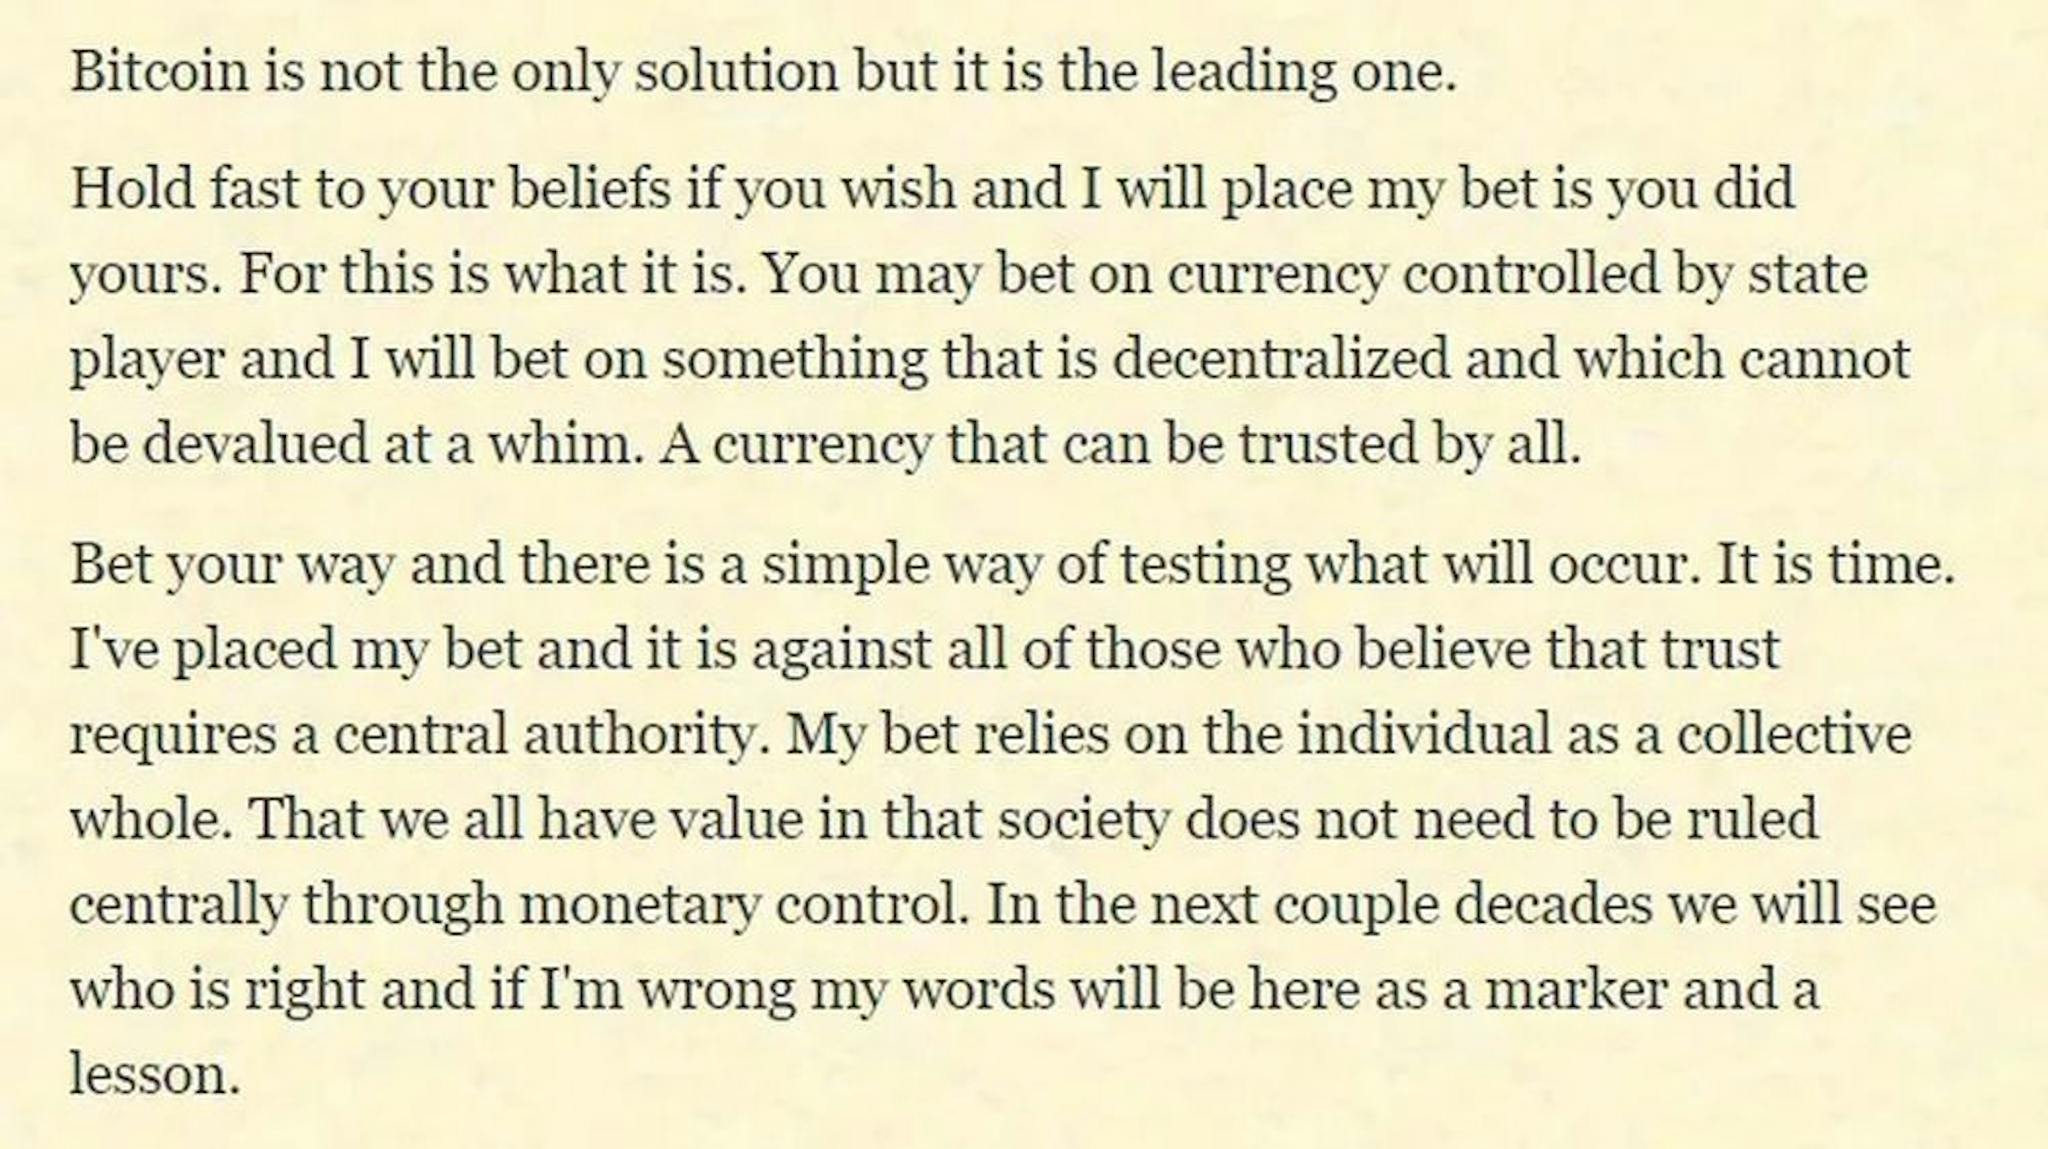 Snippet from “A diatribe on Bitcoin”.